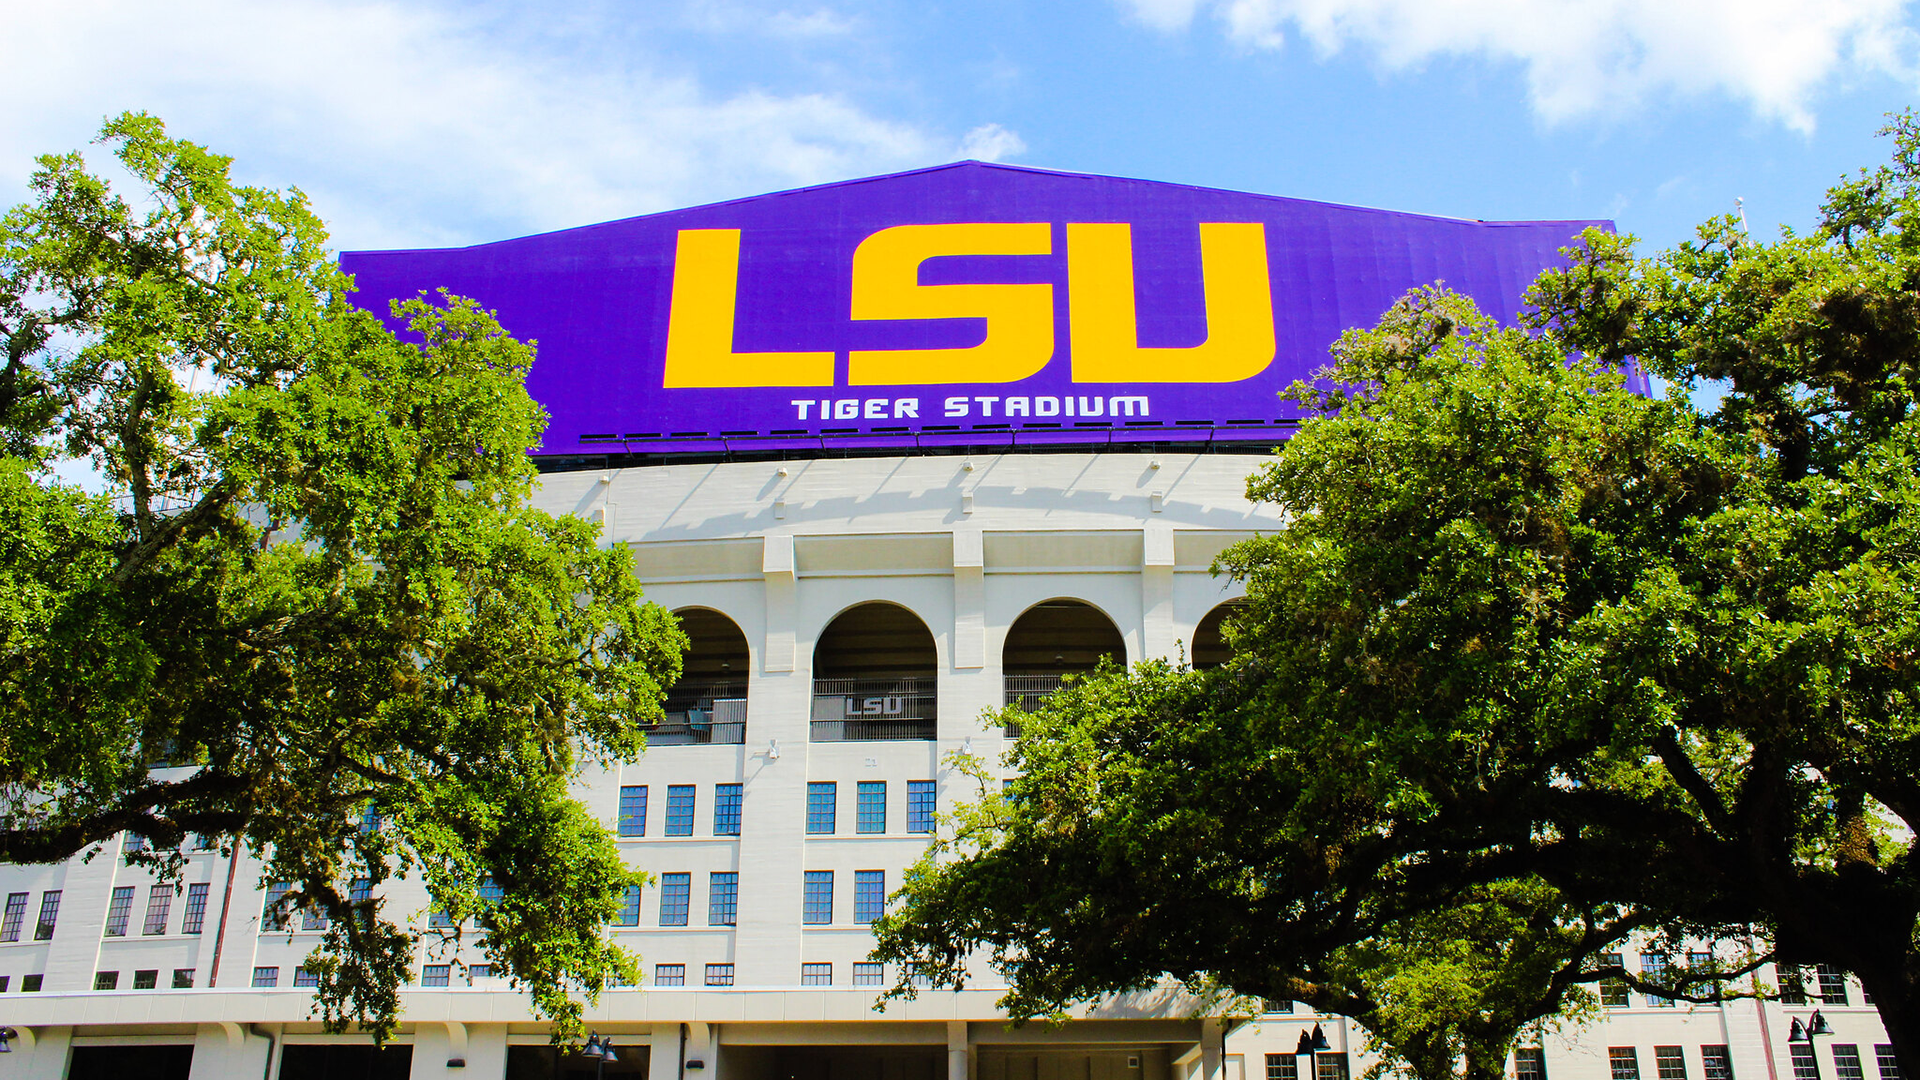 "Today we draw a line from where we can measure our progress going forward," LSU's president said, apologizing to LSU sexual assault survivors.